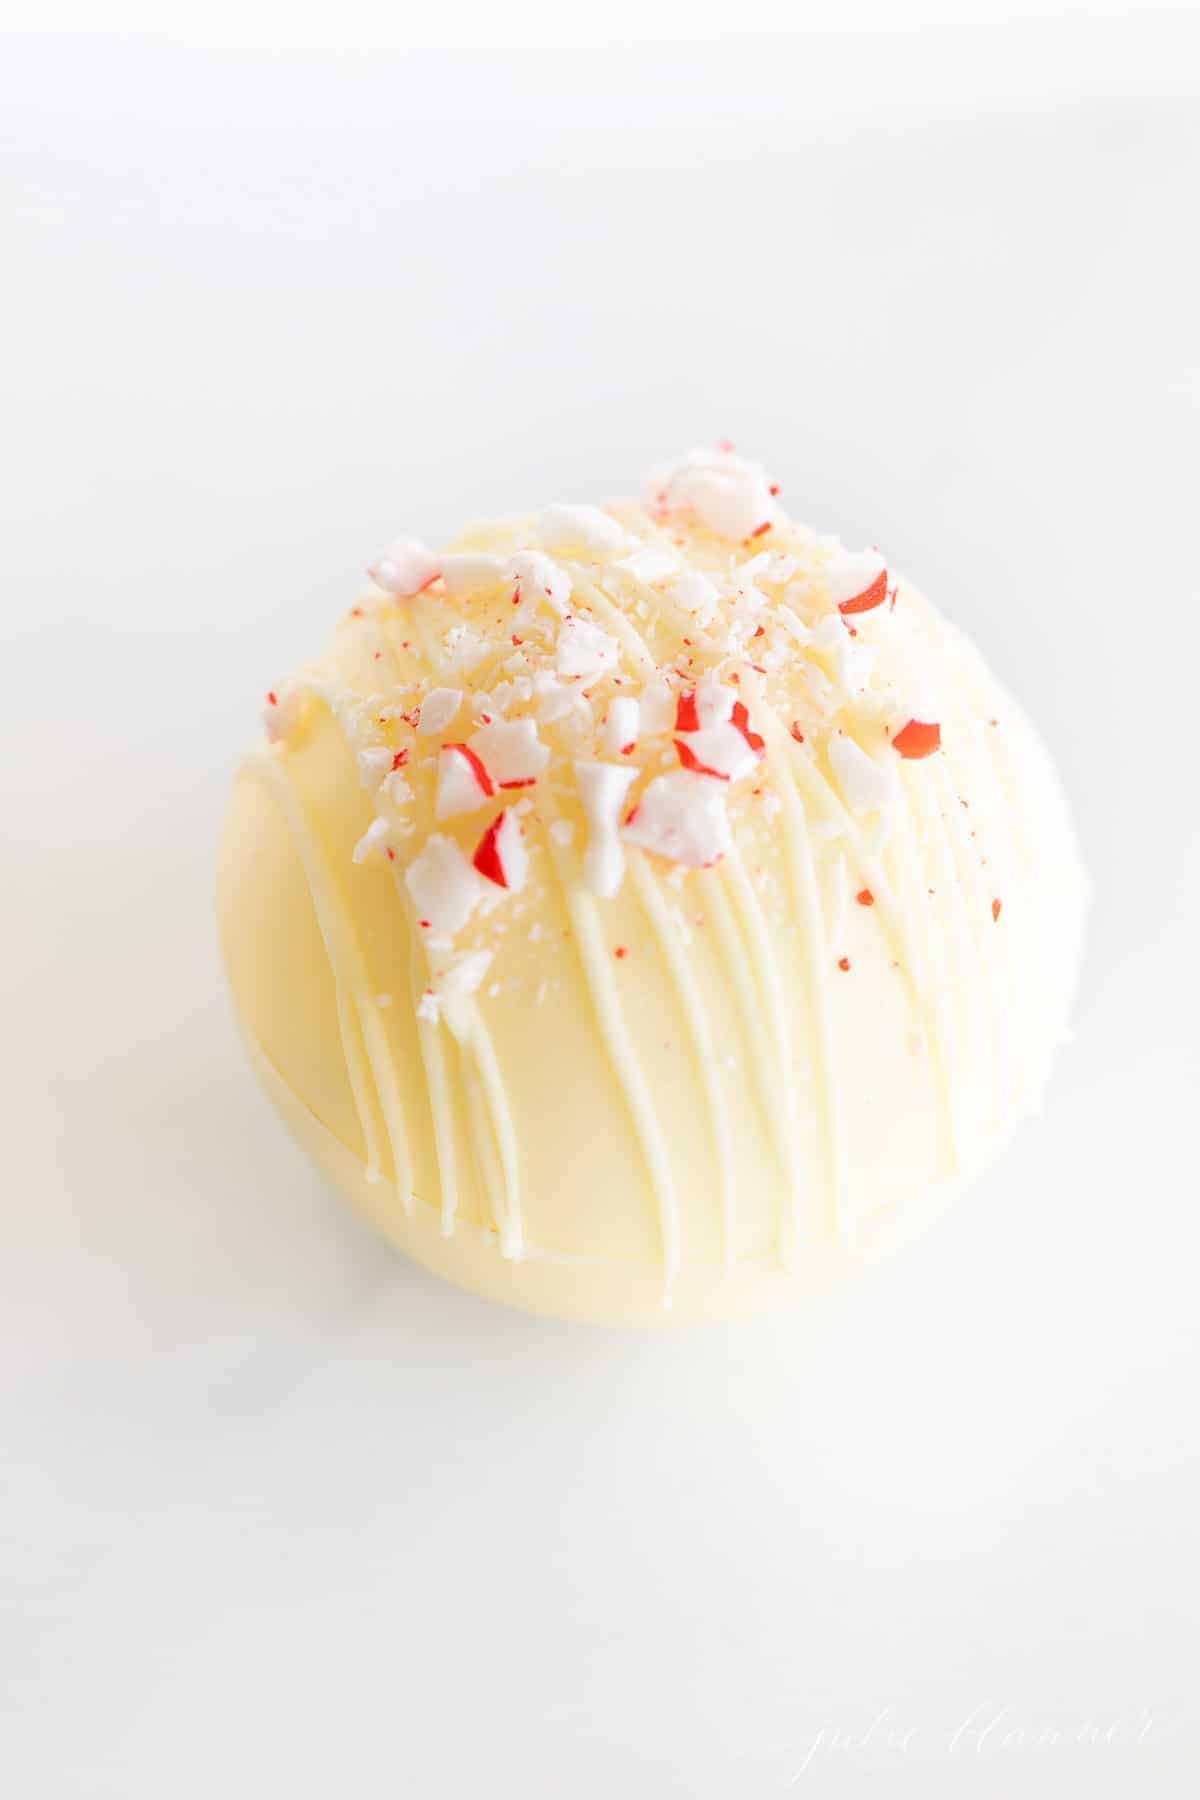 A white chocolate hot chocolate bomb topped with crushed peppermint on a marble surface.